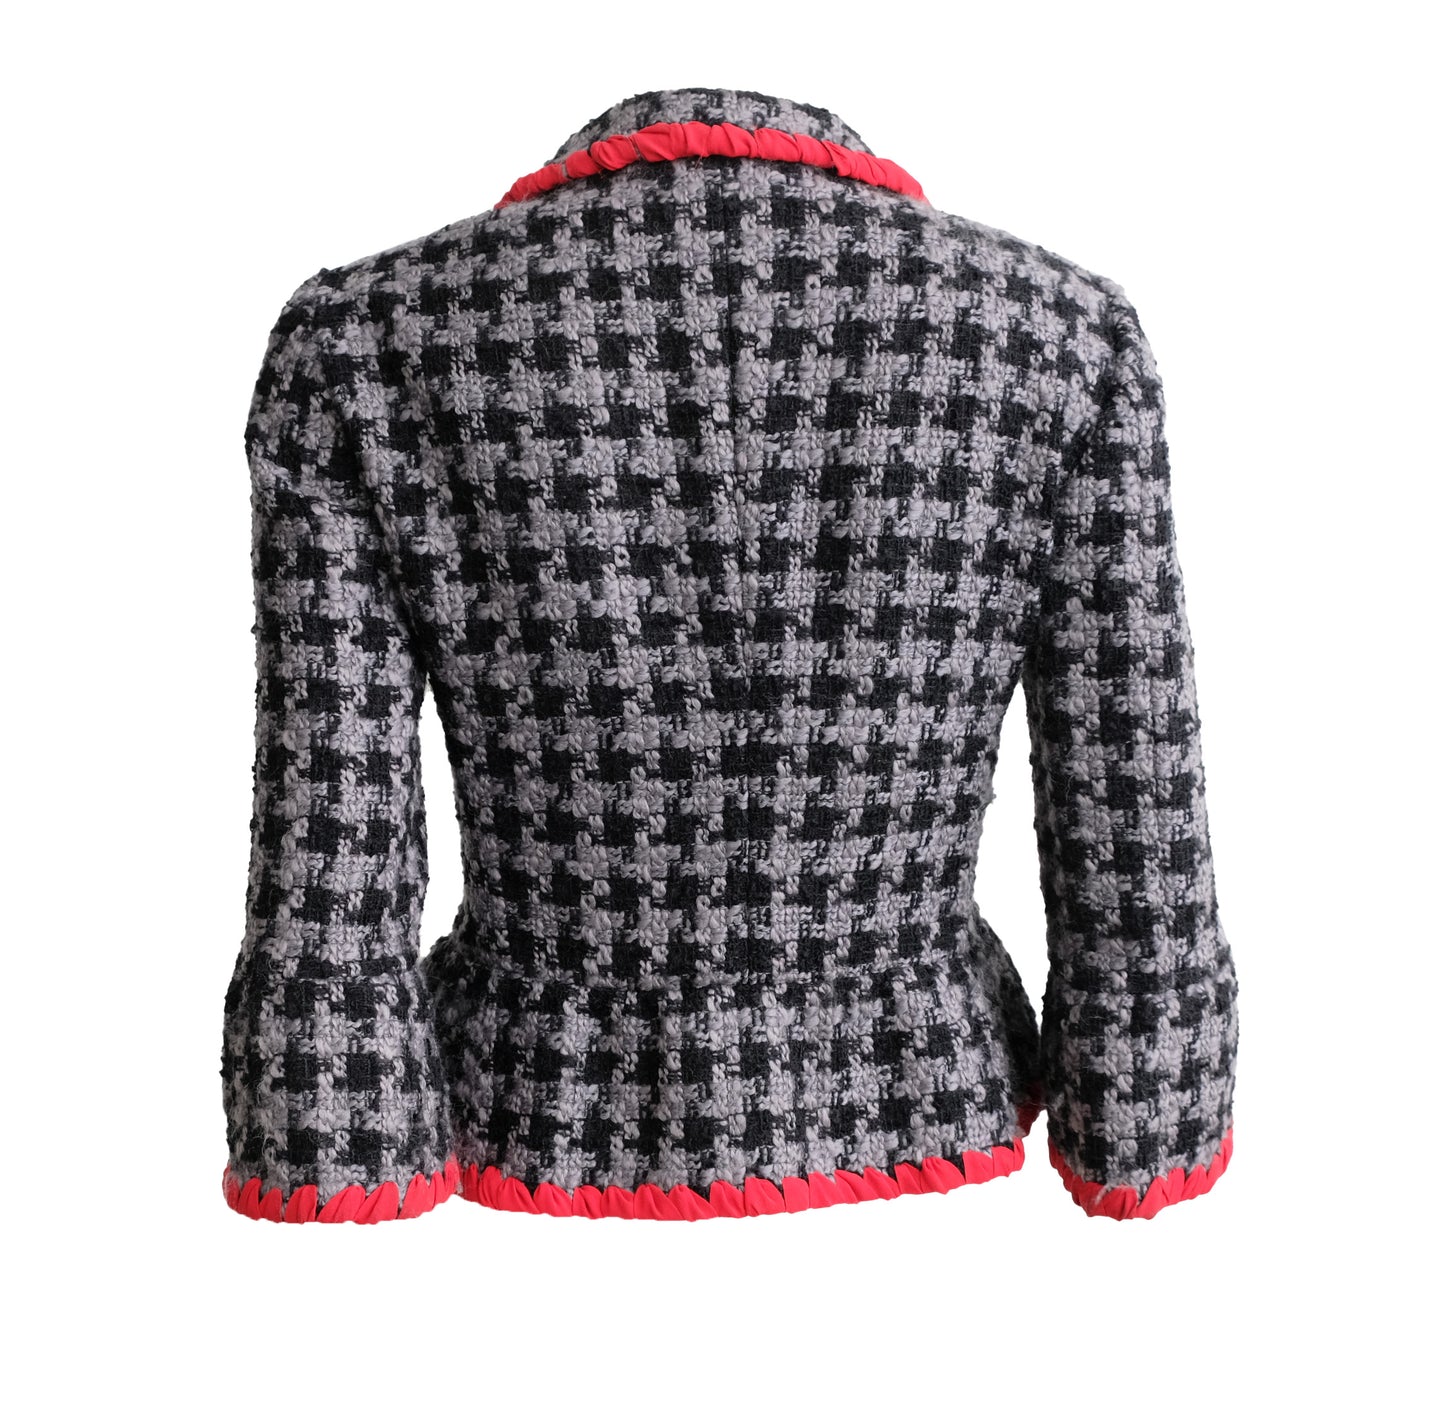 Moschino Vintage Jacket in Houndstooth Check with Red Trim, UK10